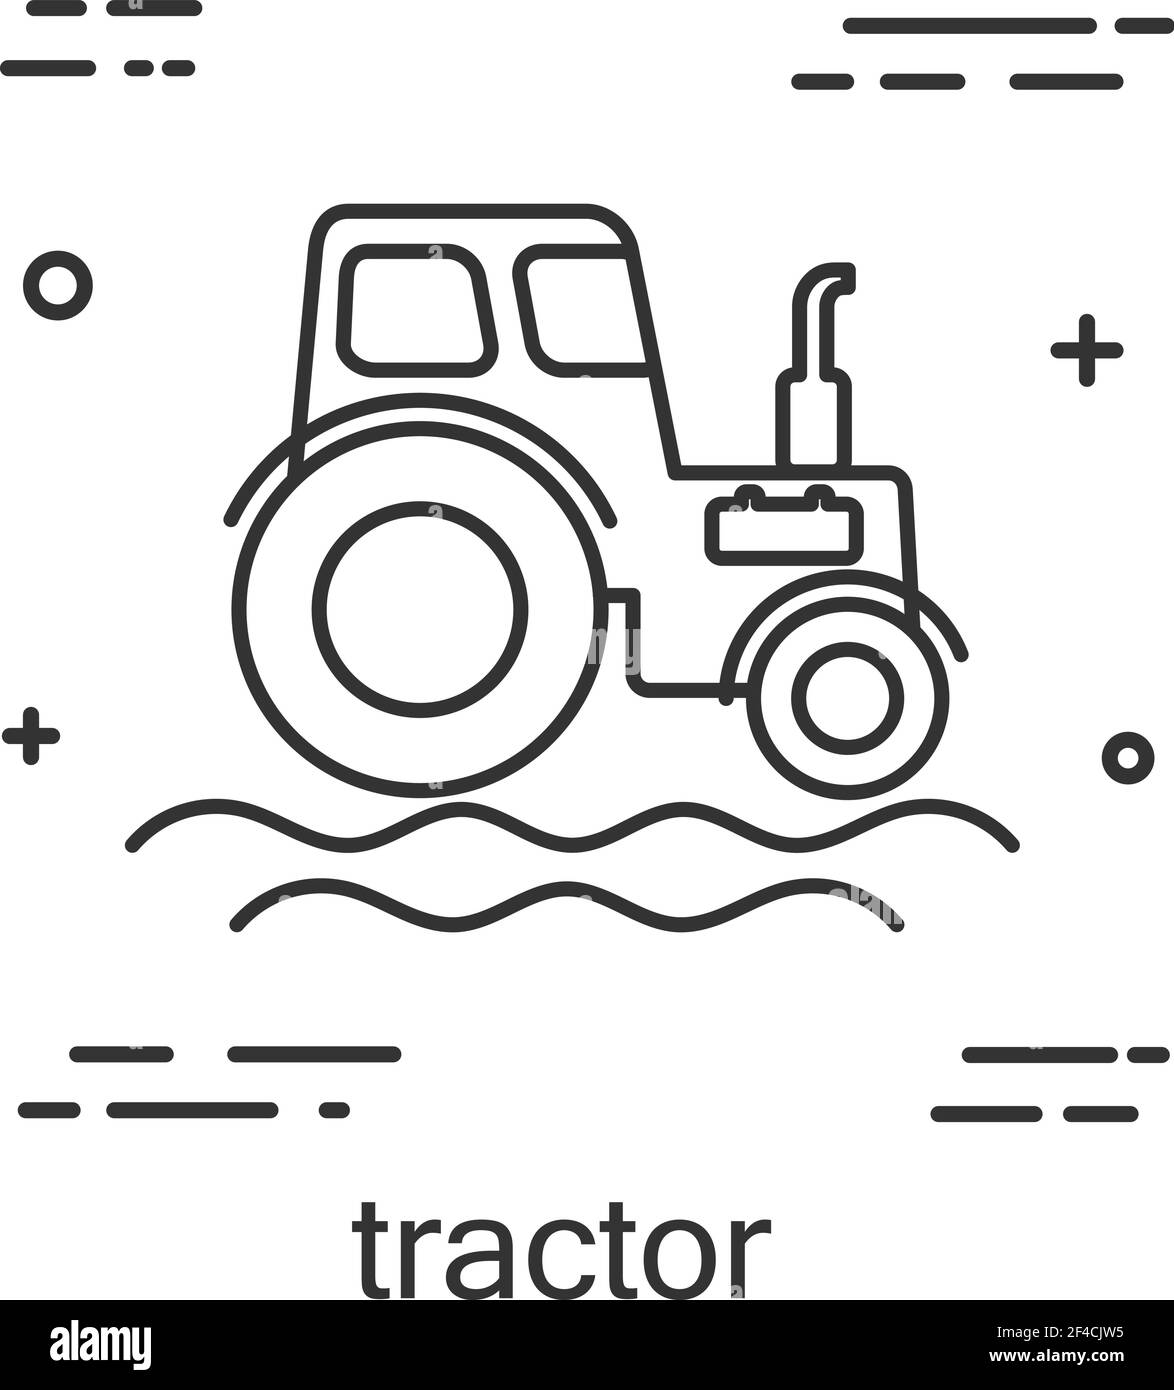 Tractor in a linear style. Line icon isolated on white background. Vector illustration. Stock Vector